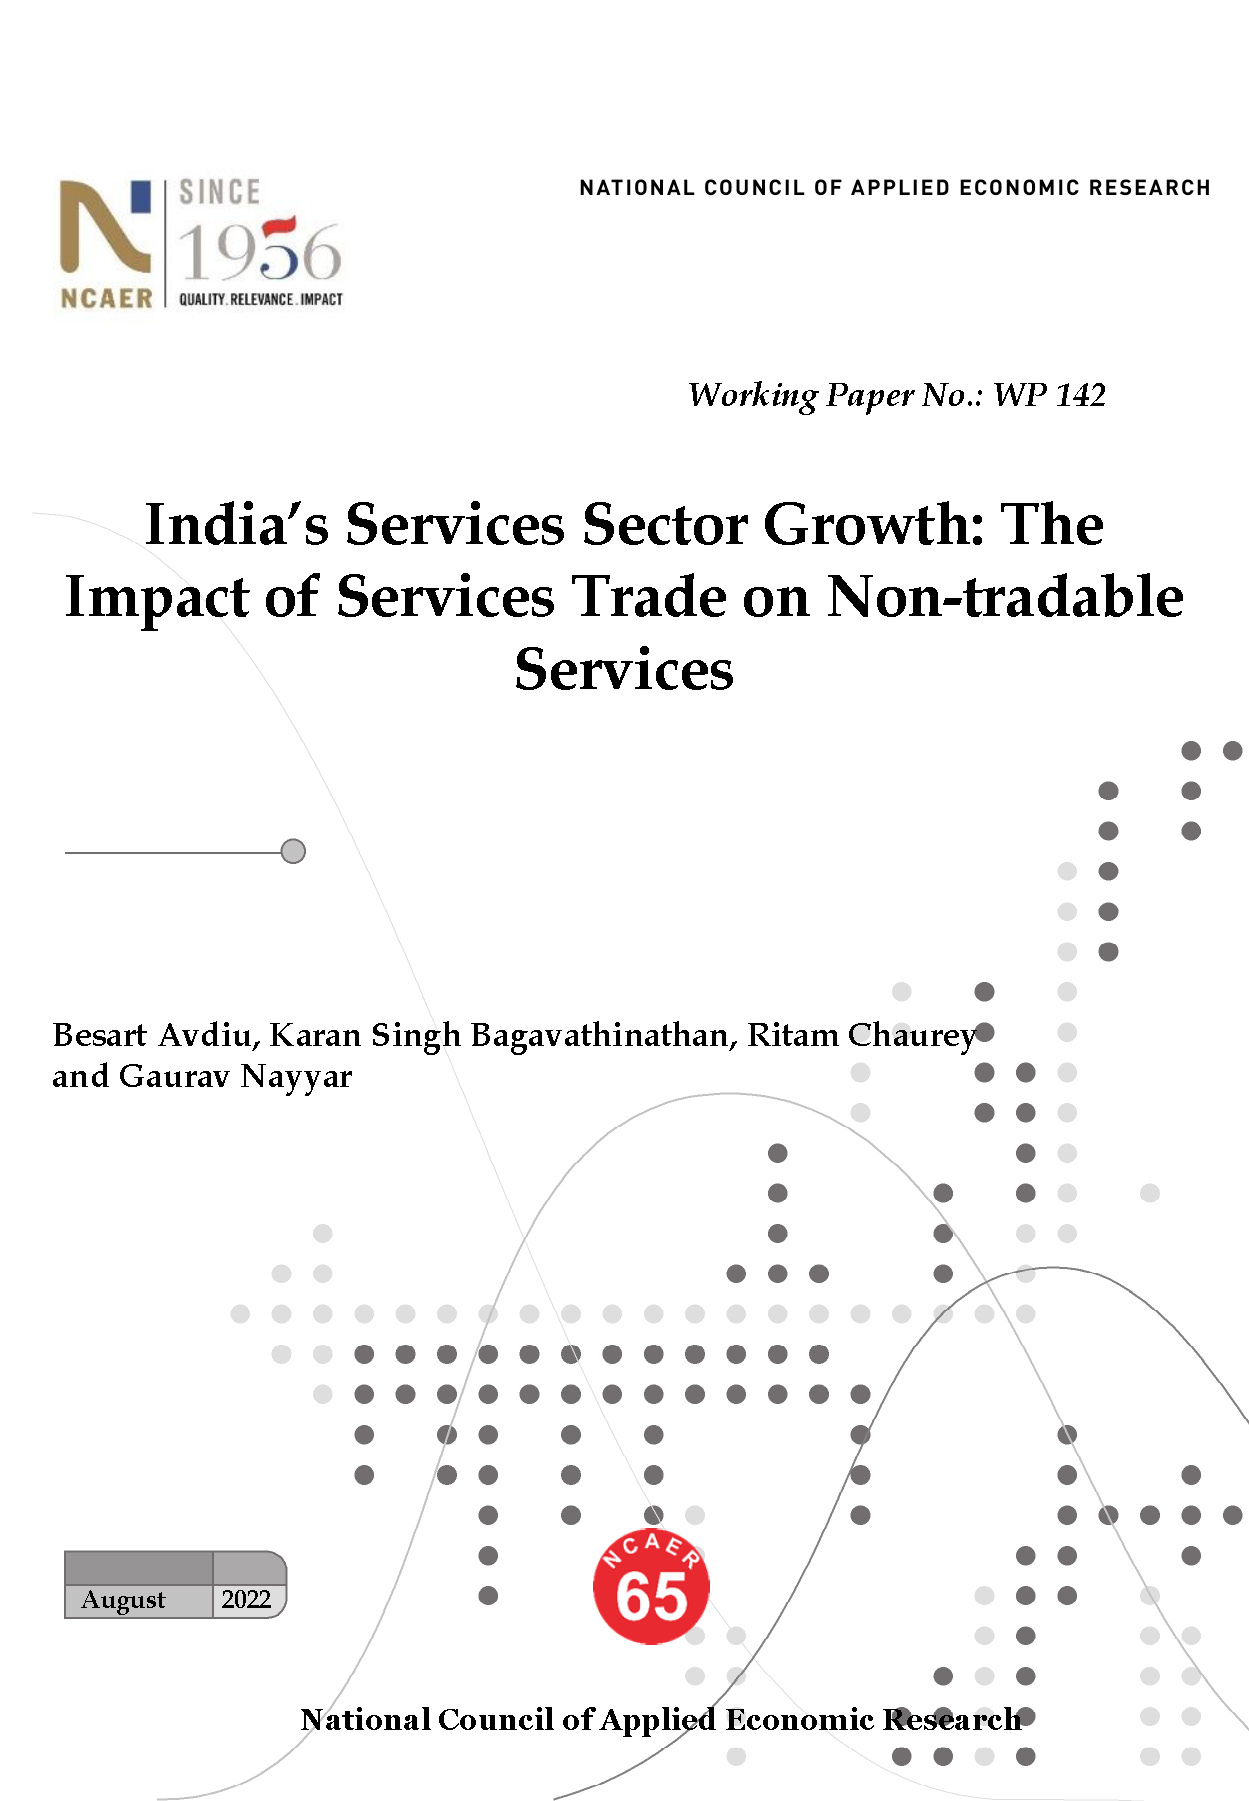 India’s Services Sector Growth: The Impact of Services Trade on Non-tradable Services